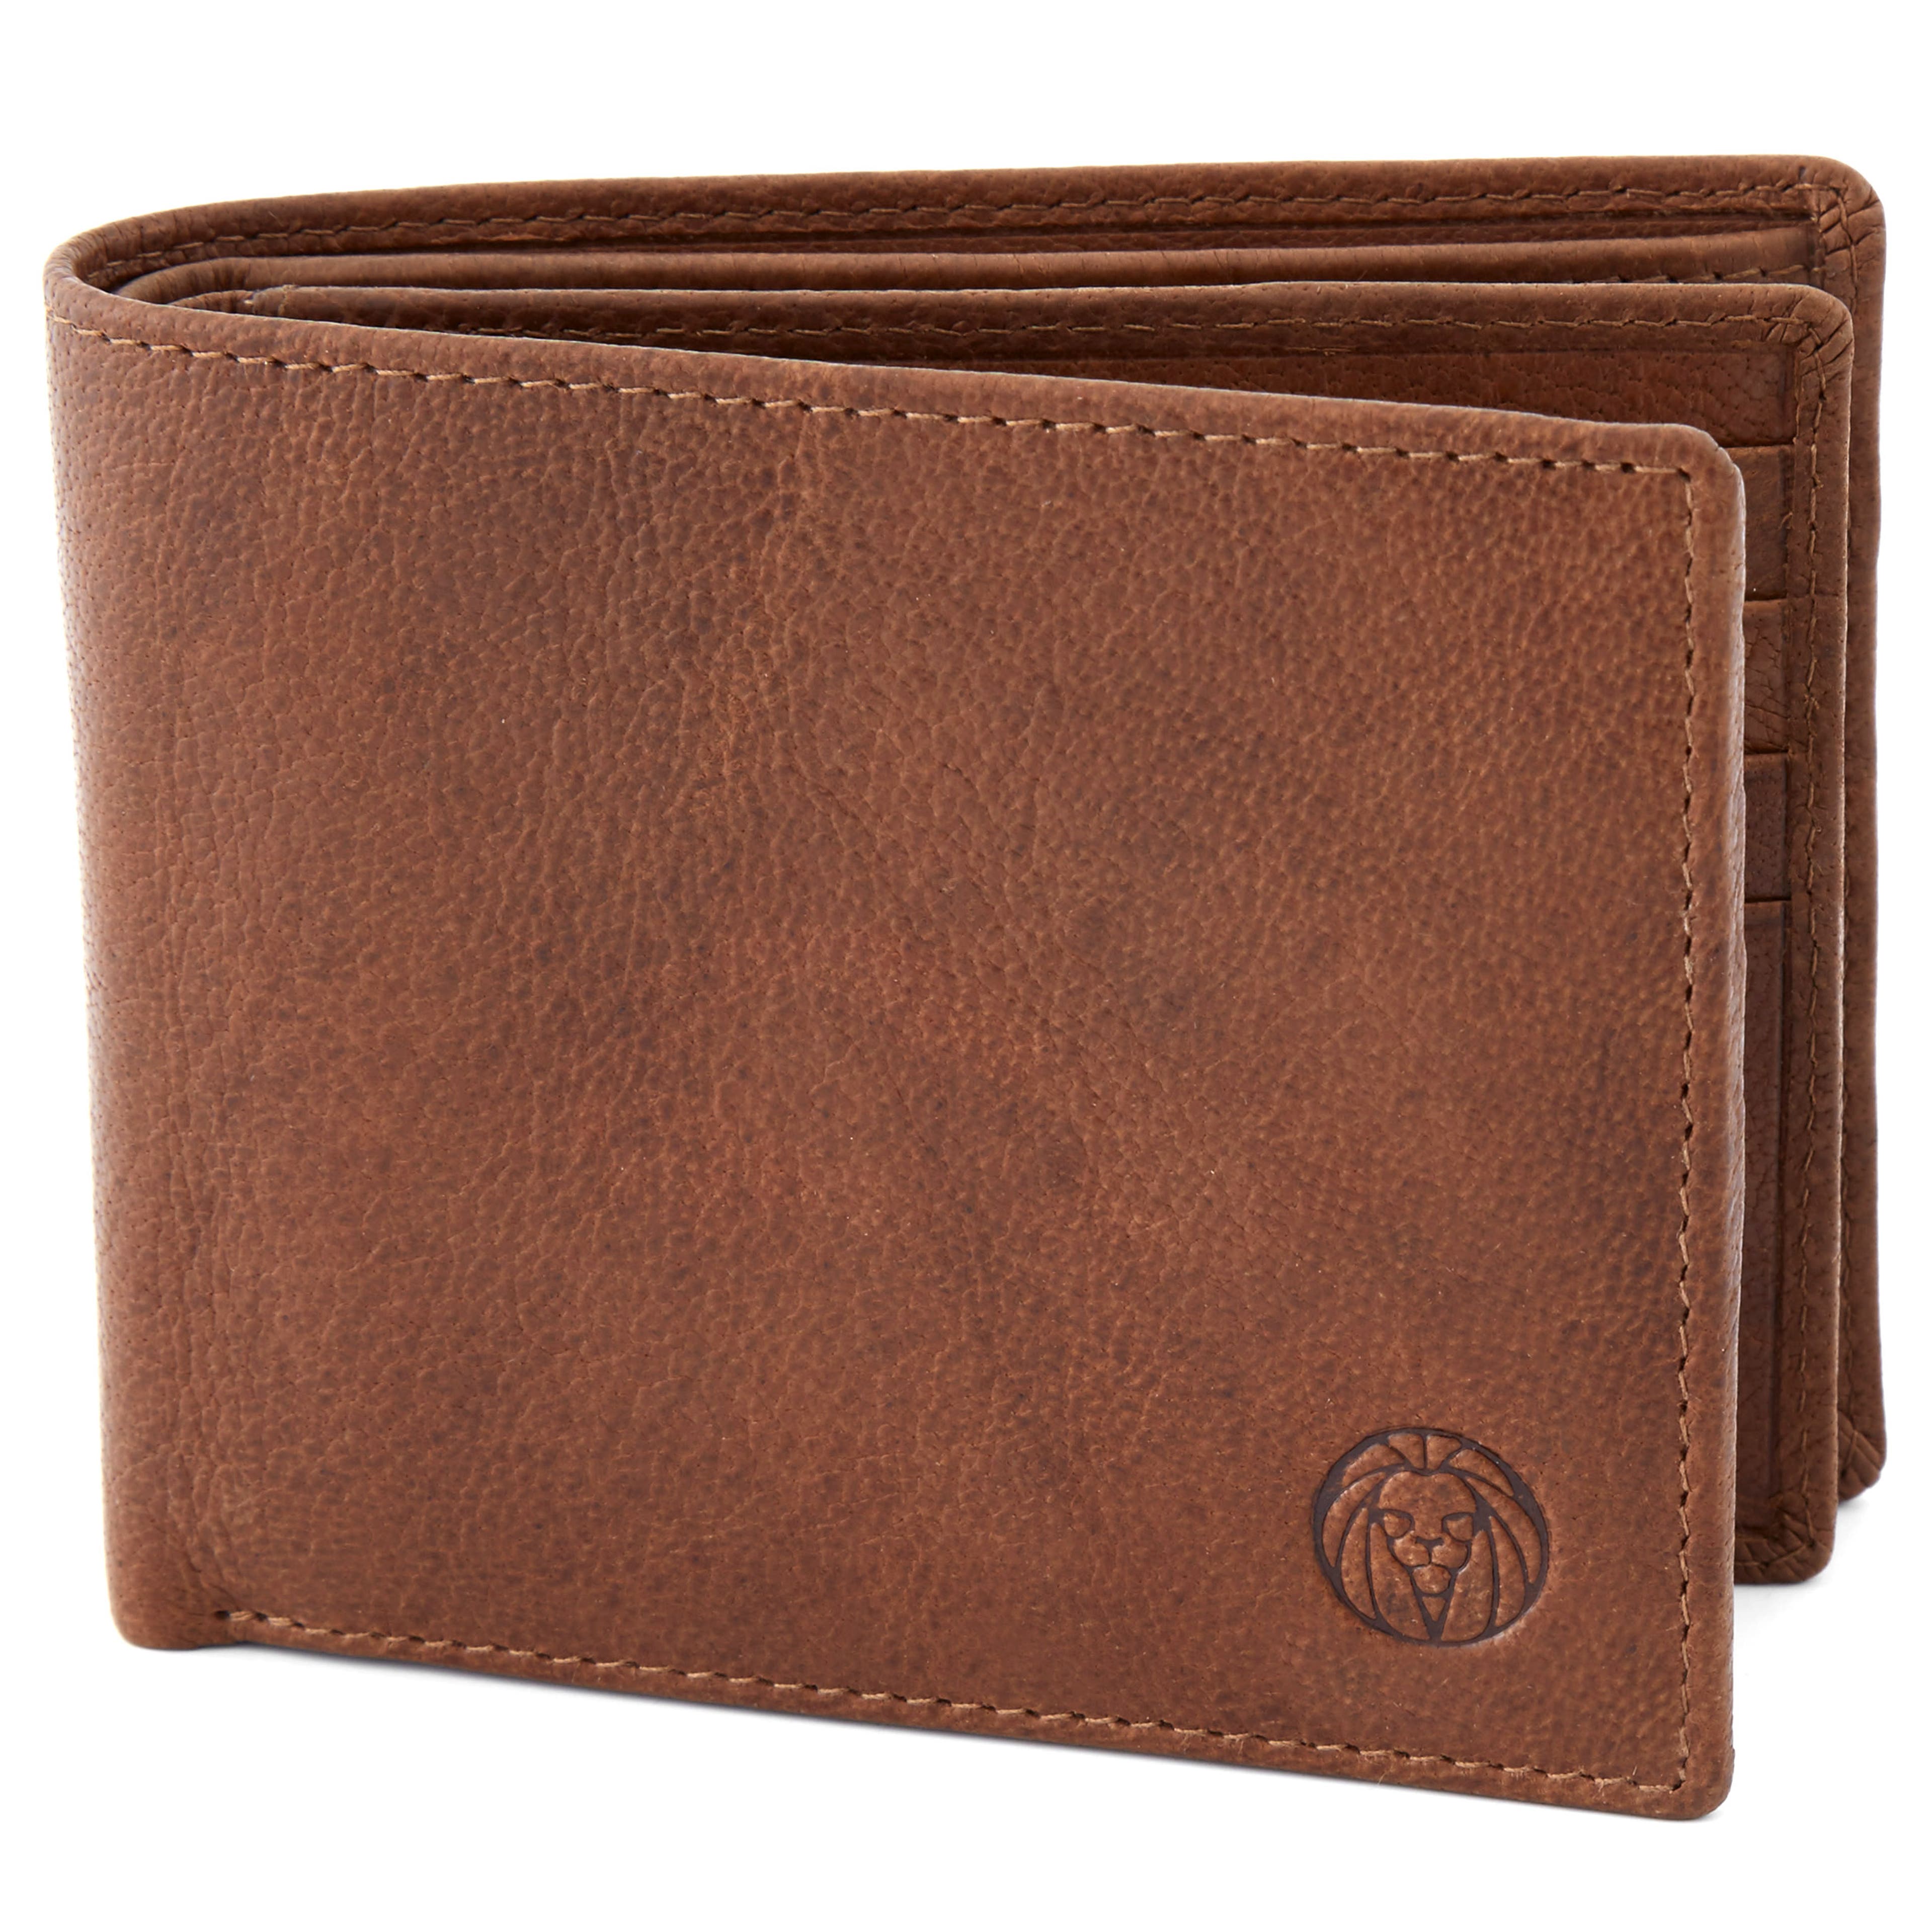 Lucleon Men's Leather Wallet